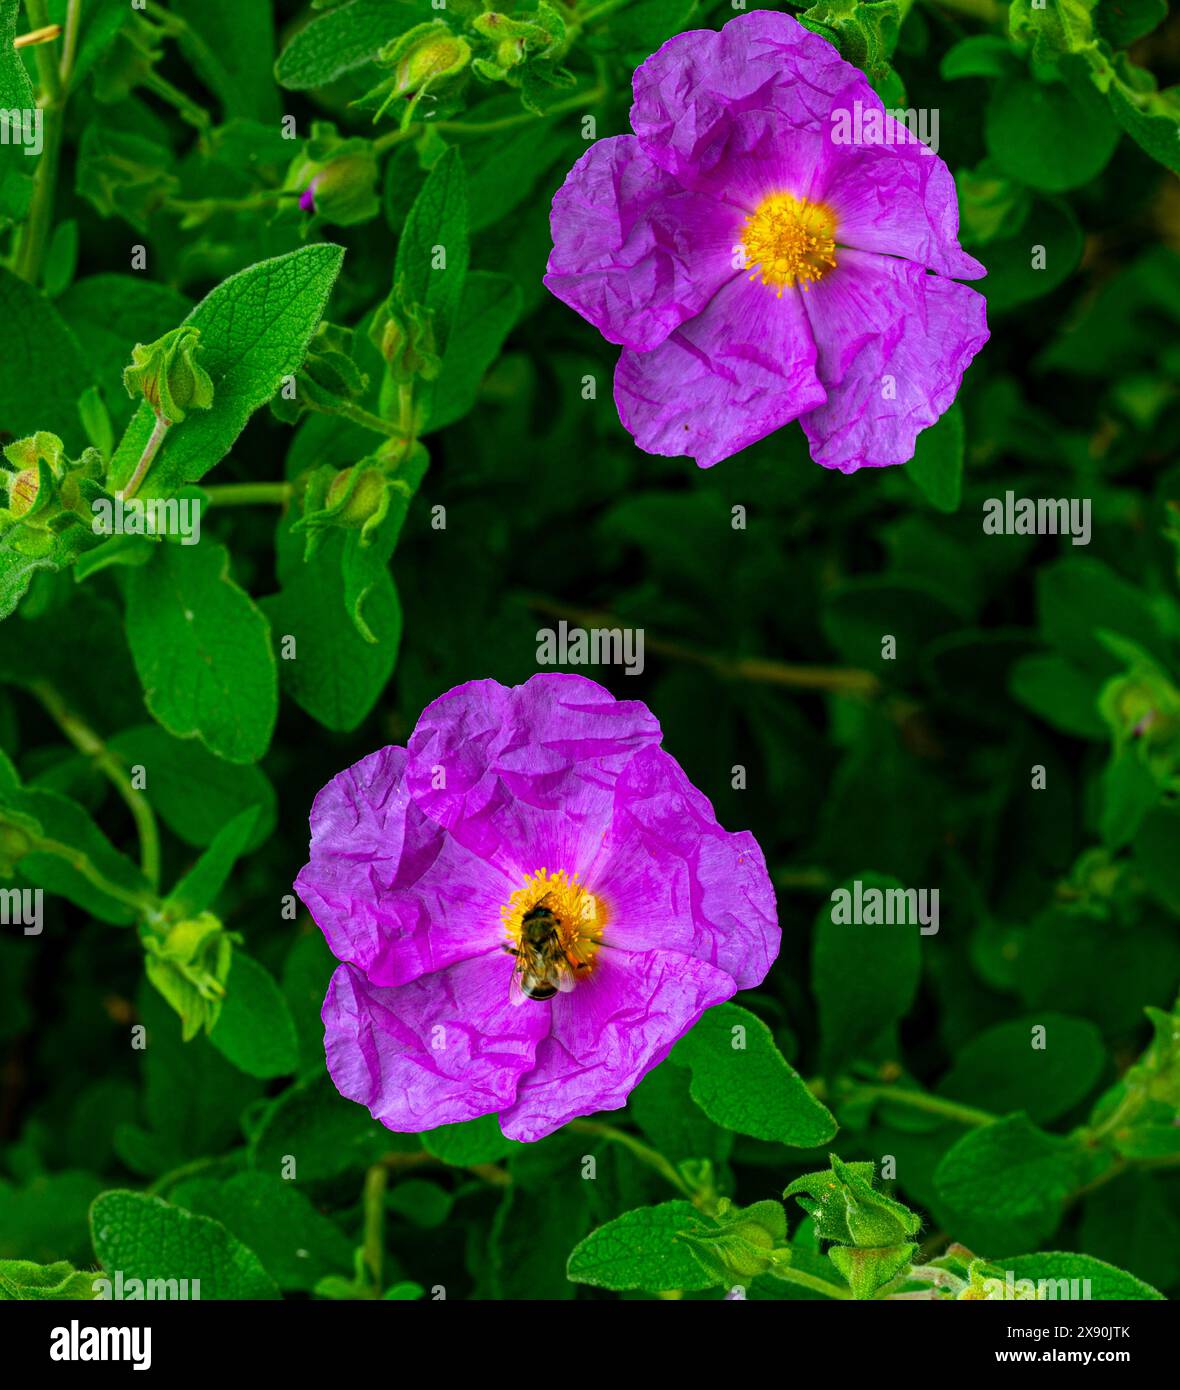 Close-up of pink flower Grey leaved Cistus, Cistus symphytifolius of family Cistaceae. It is endemic to the Canary Islands. Stock Photo